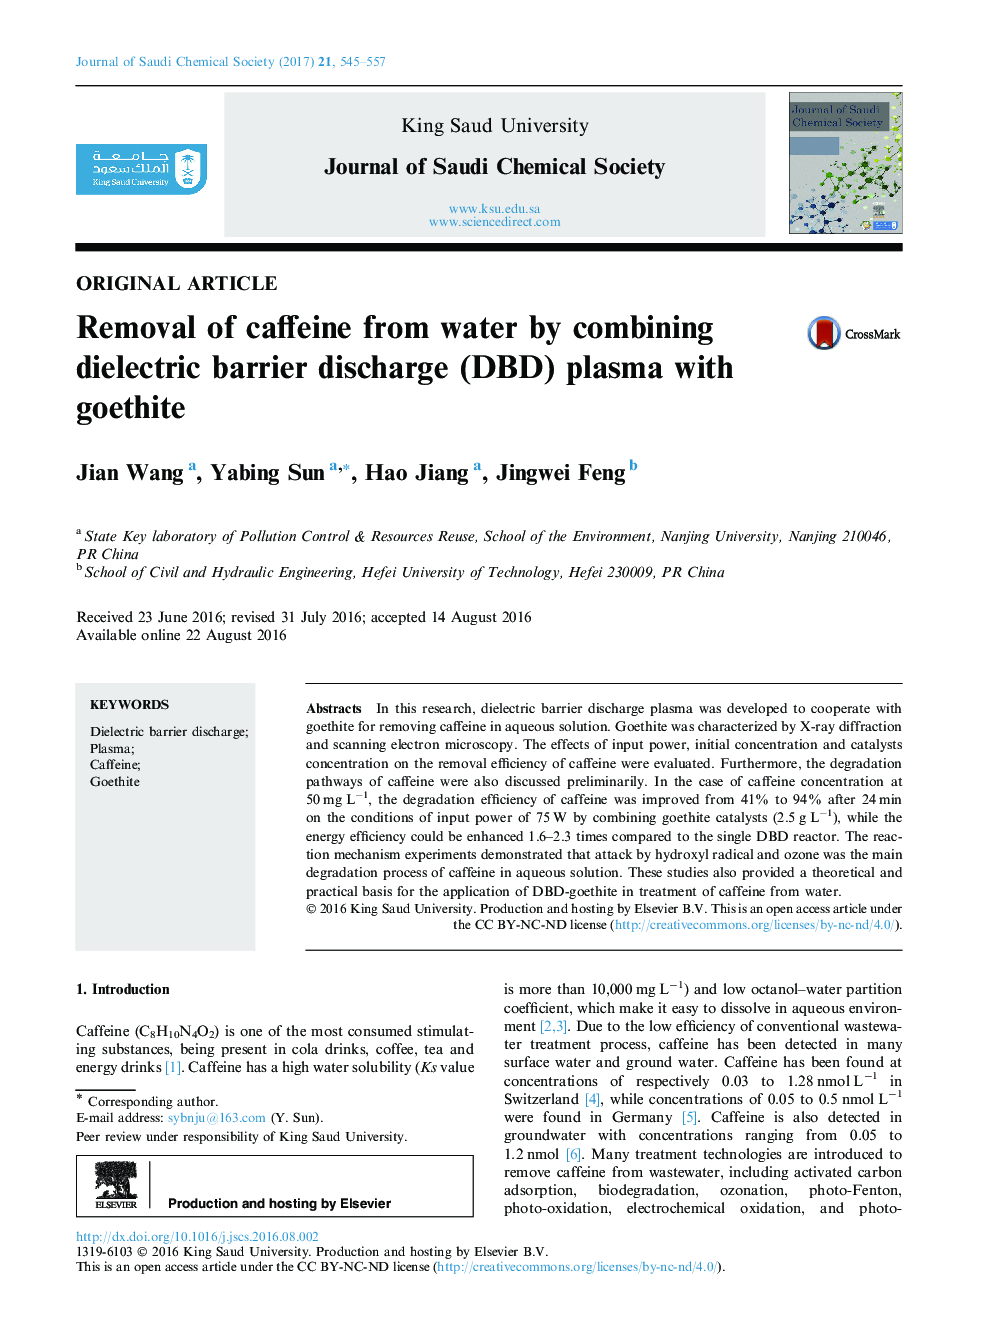 Removal of caffeine from water by combining dielectric barrier discharge (DBD) plasma with goethite